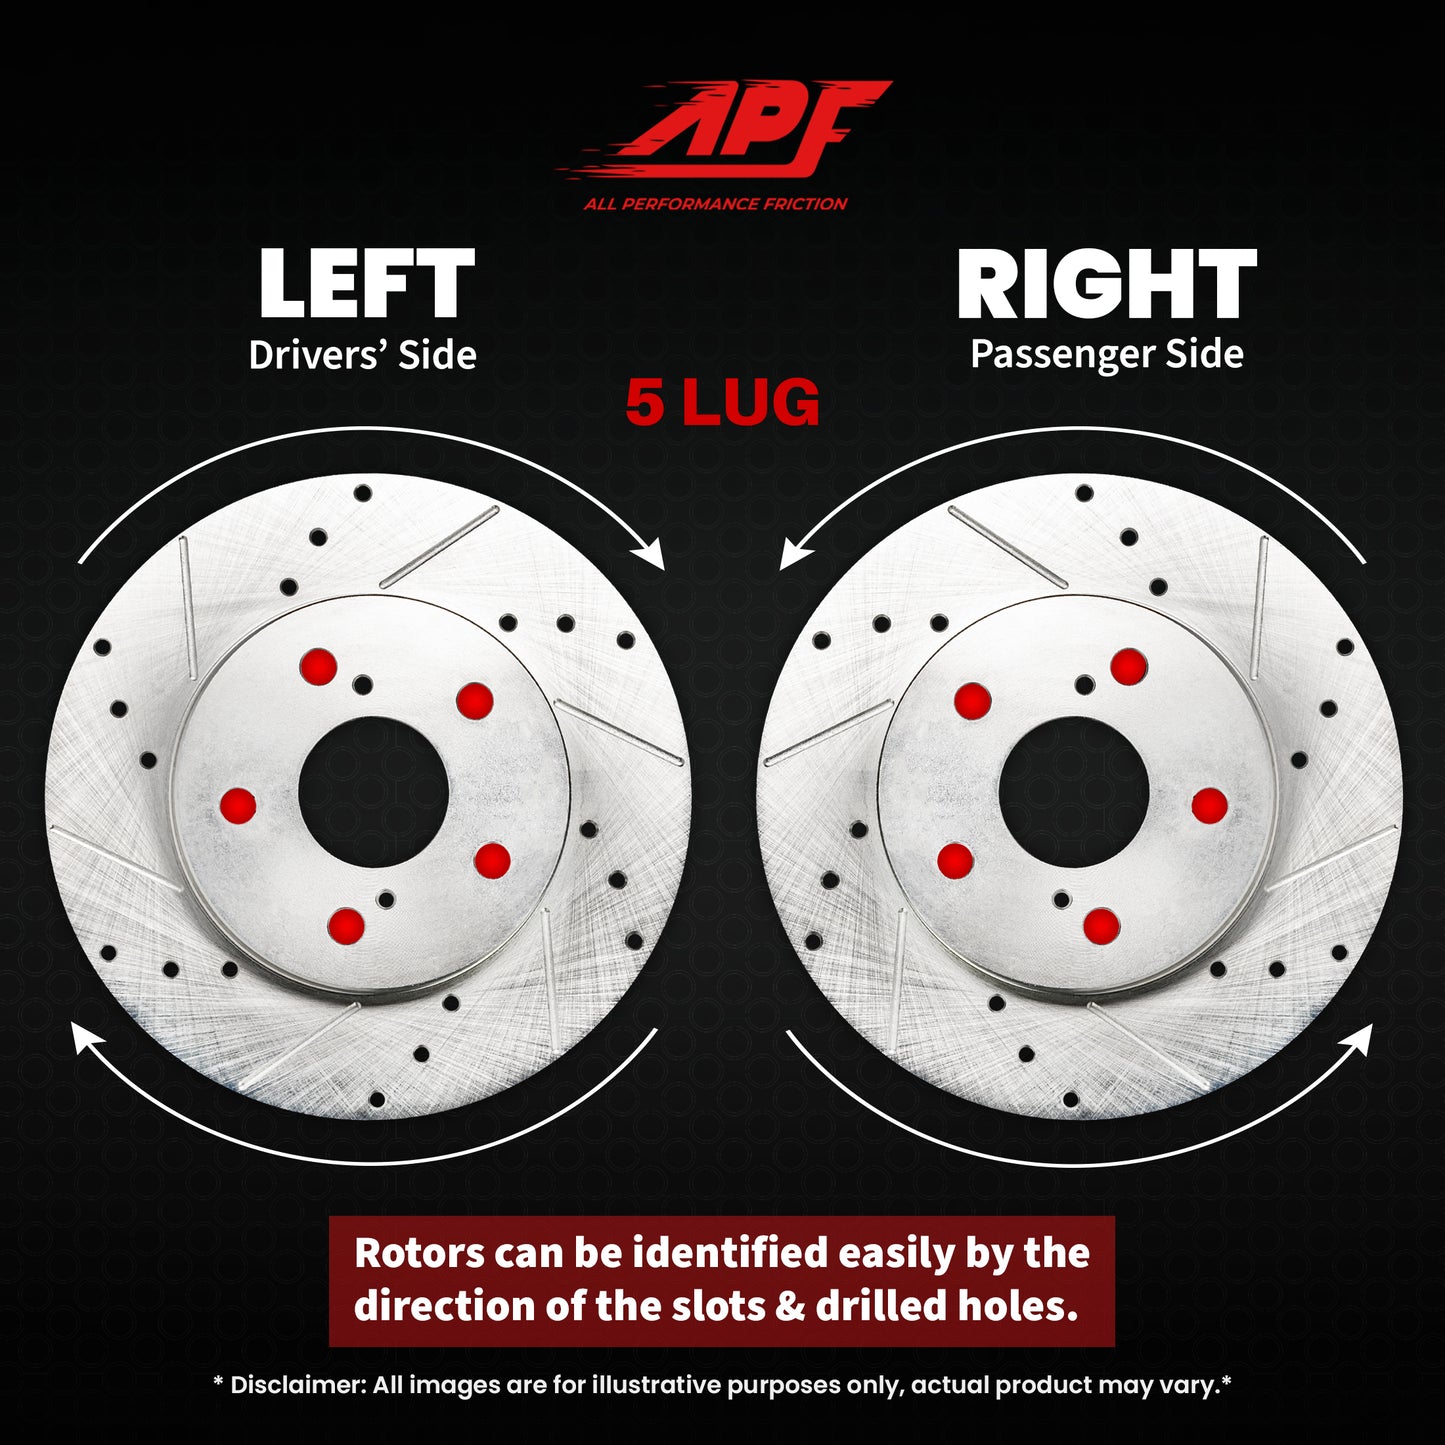 APF All Performance Friction Front Rotors compatible with Ford Crown Victoria 2003-2011 Zinc Drilled Slotted Rotors | $163.55